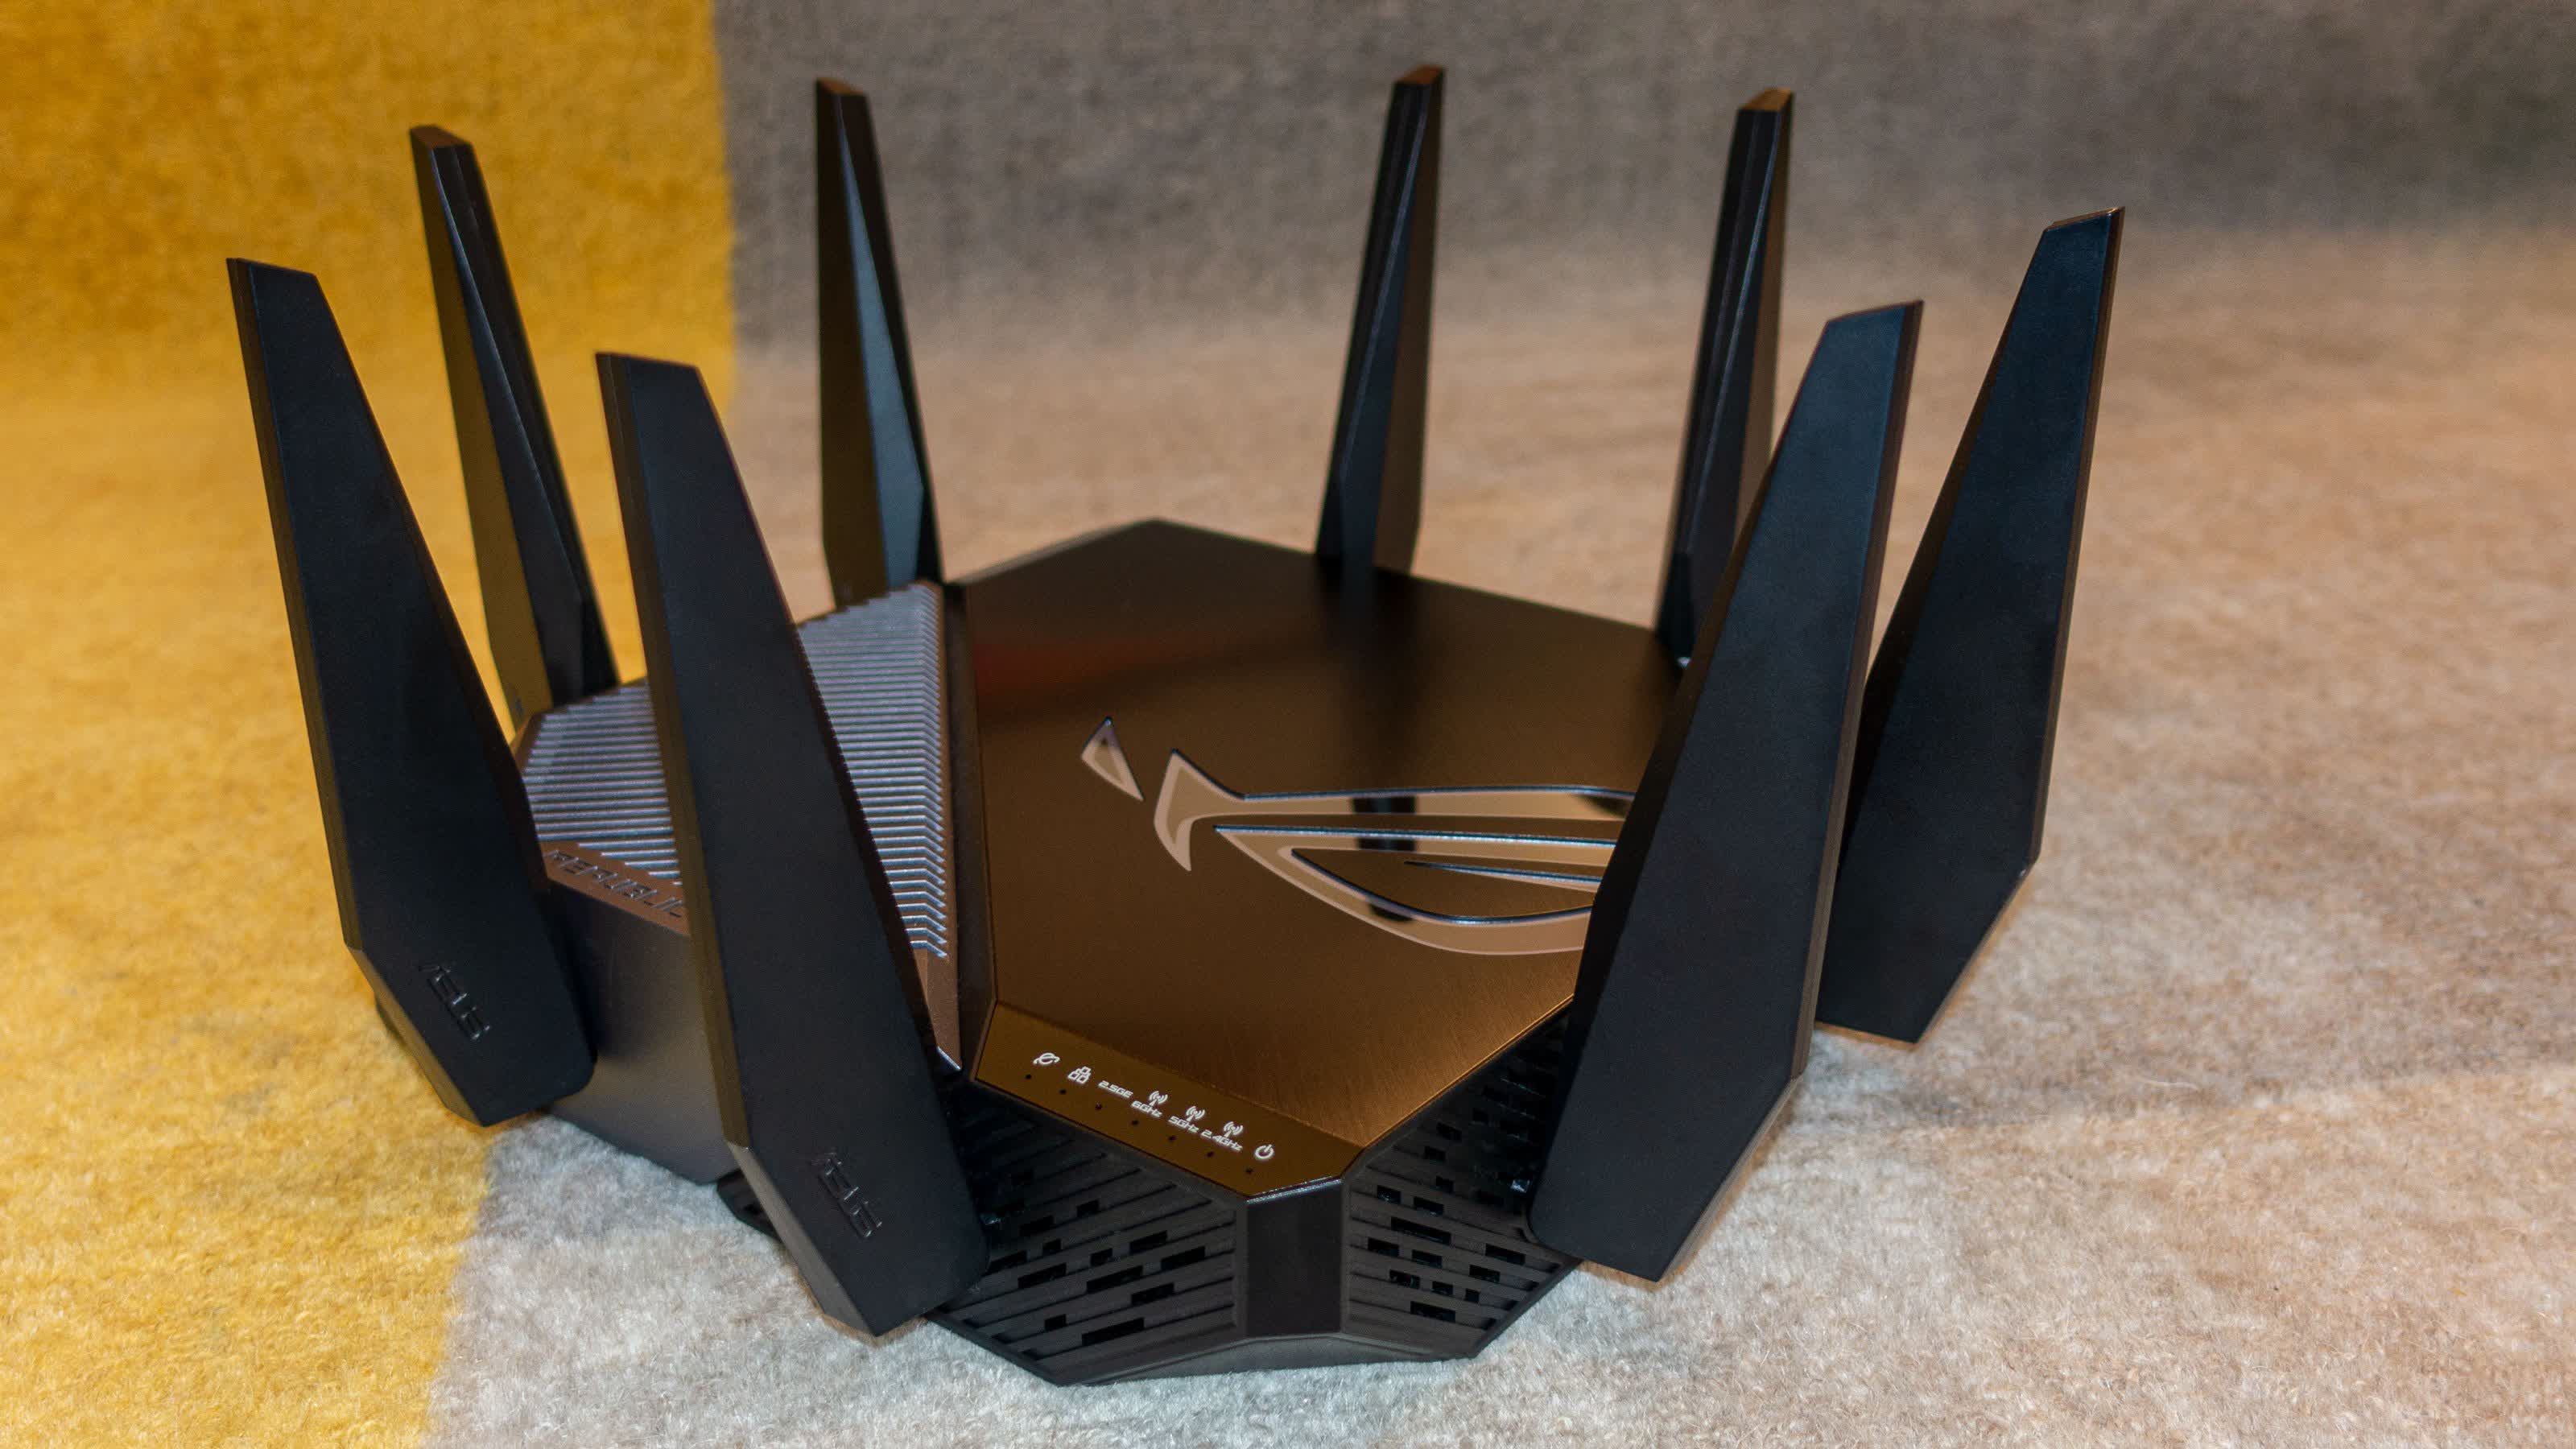 Cyclops Blink botnet is attacking and actively exploiting Asus routers